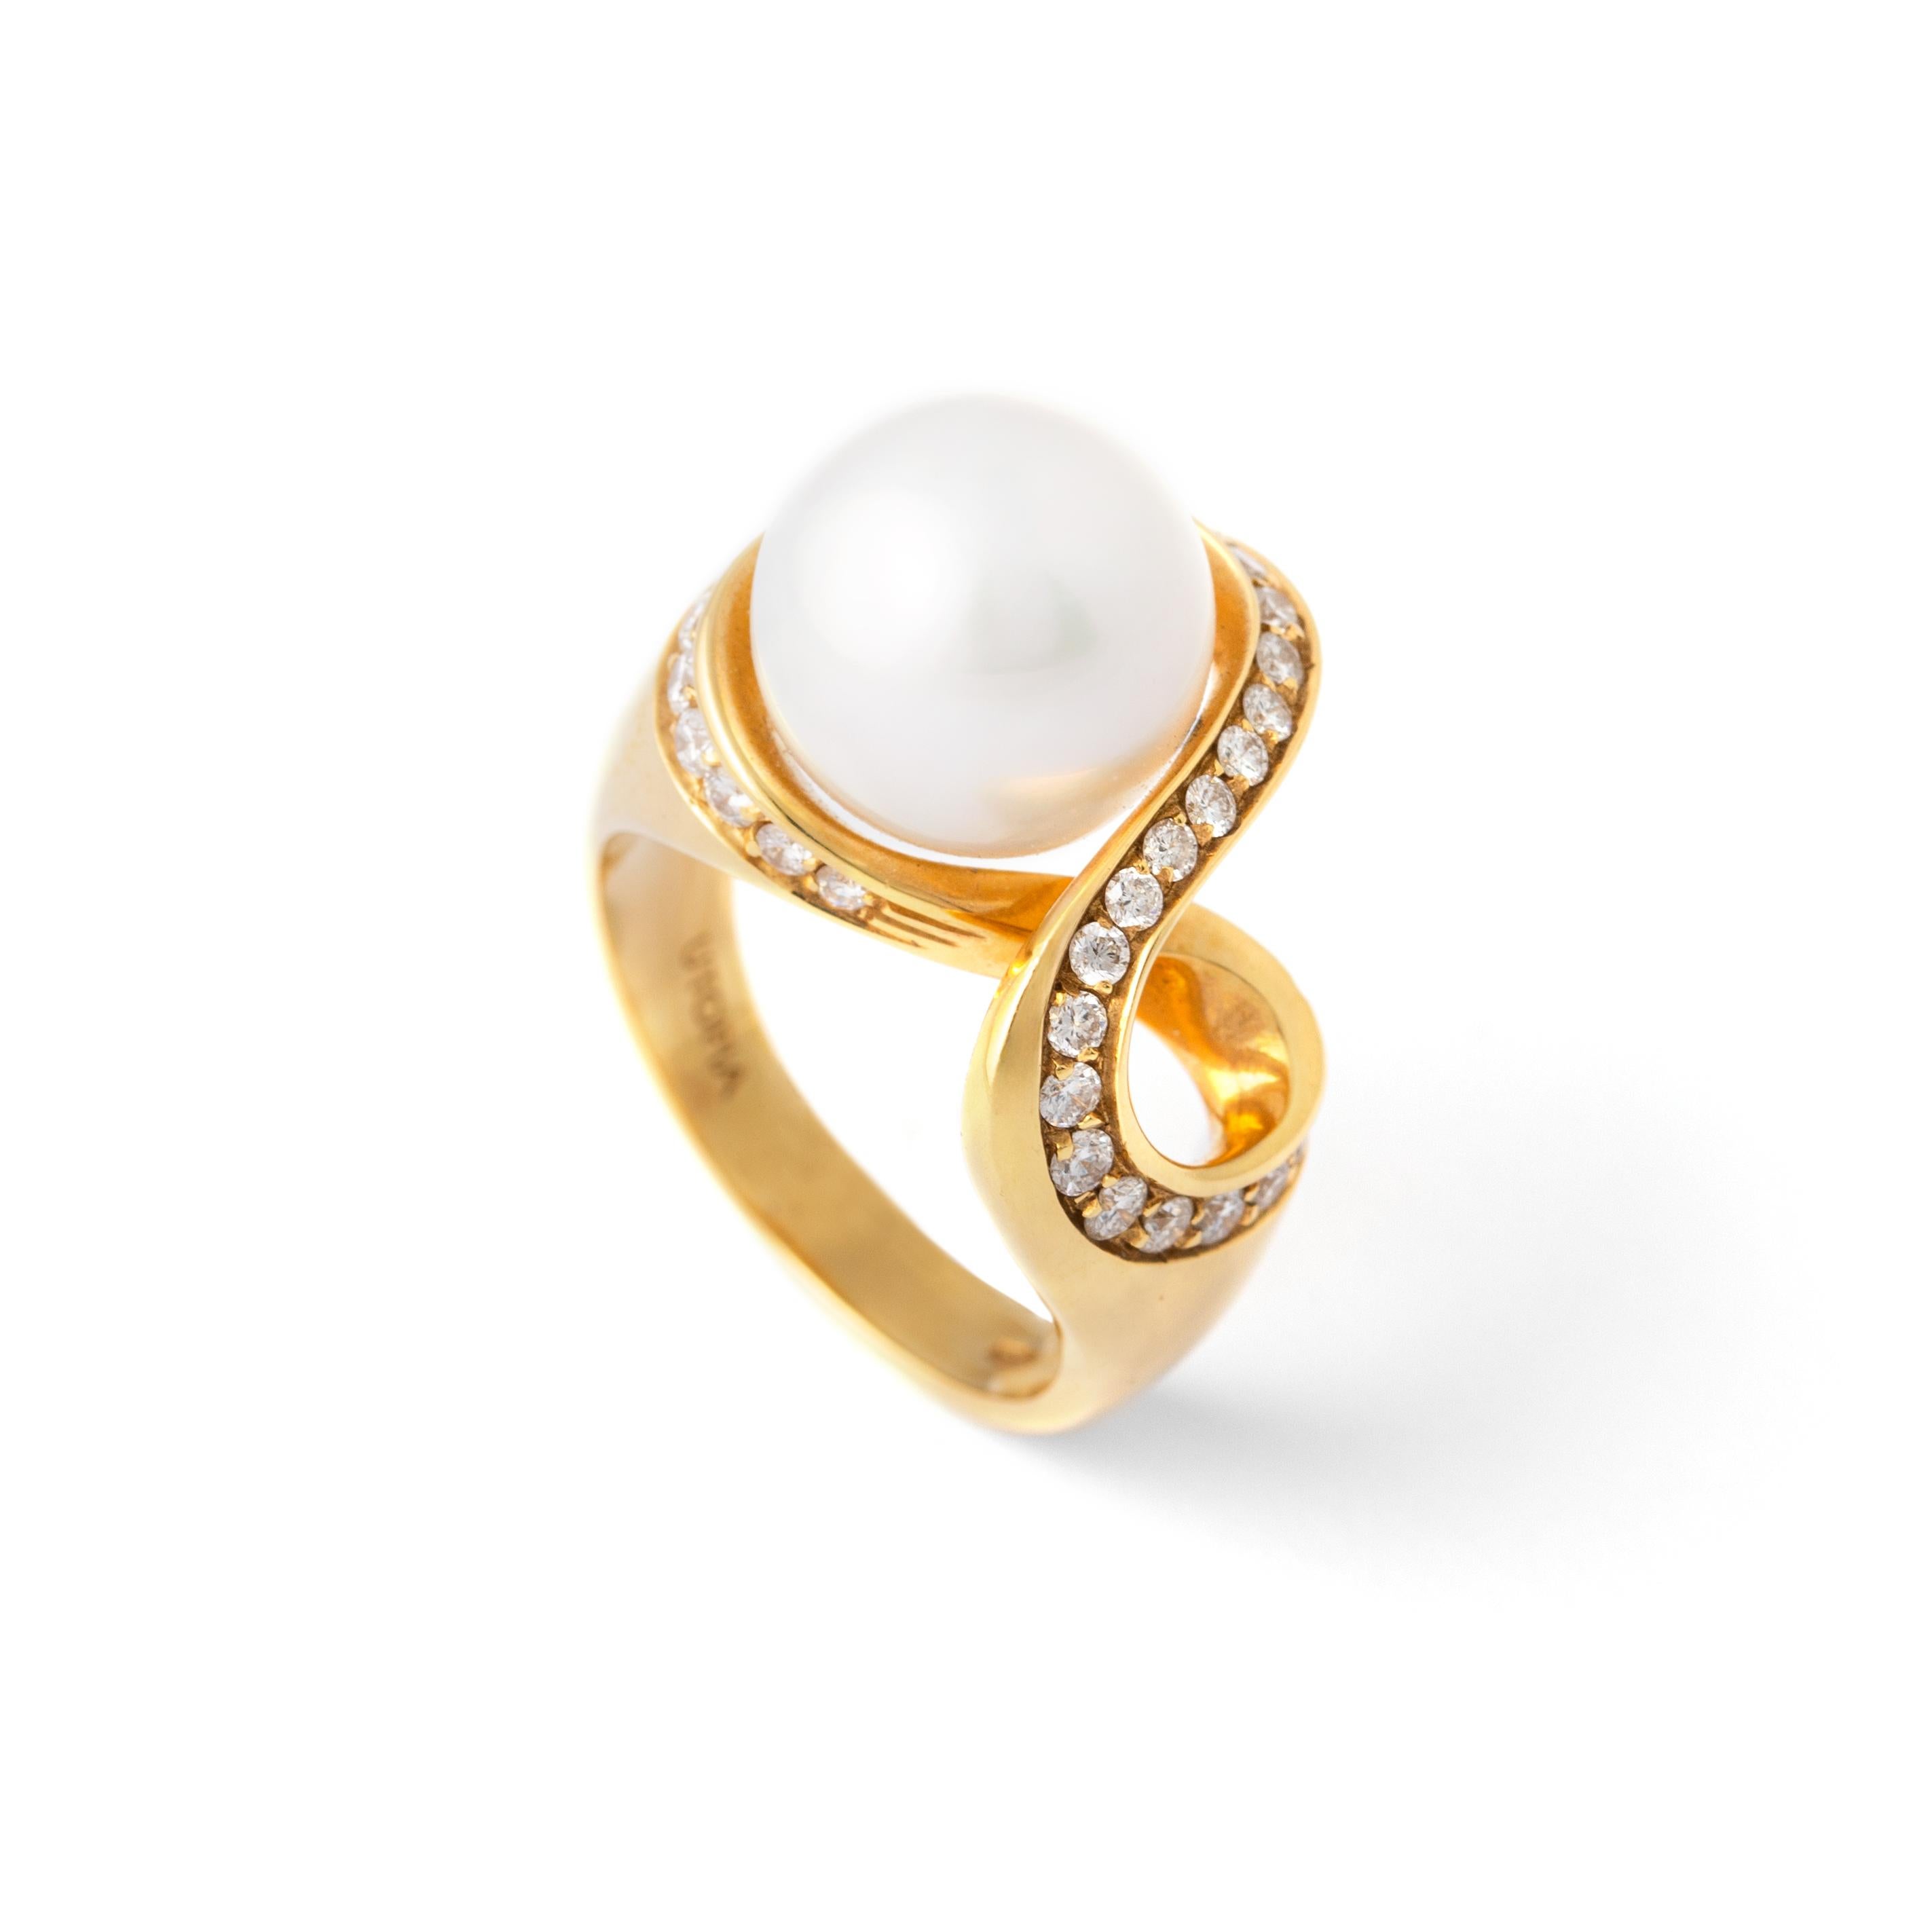 Pearl Diamond Yellow Gold 18K Ring.
Central Pearl 11.35 carat and Diamond estimated 0.75 carat H color and Vs clarity.
Total weight: 13.51 grams.
Size: 7.5 
